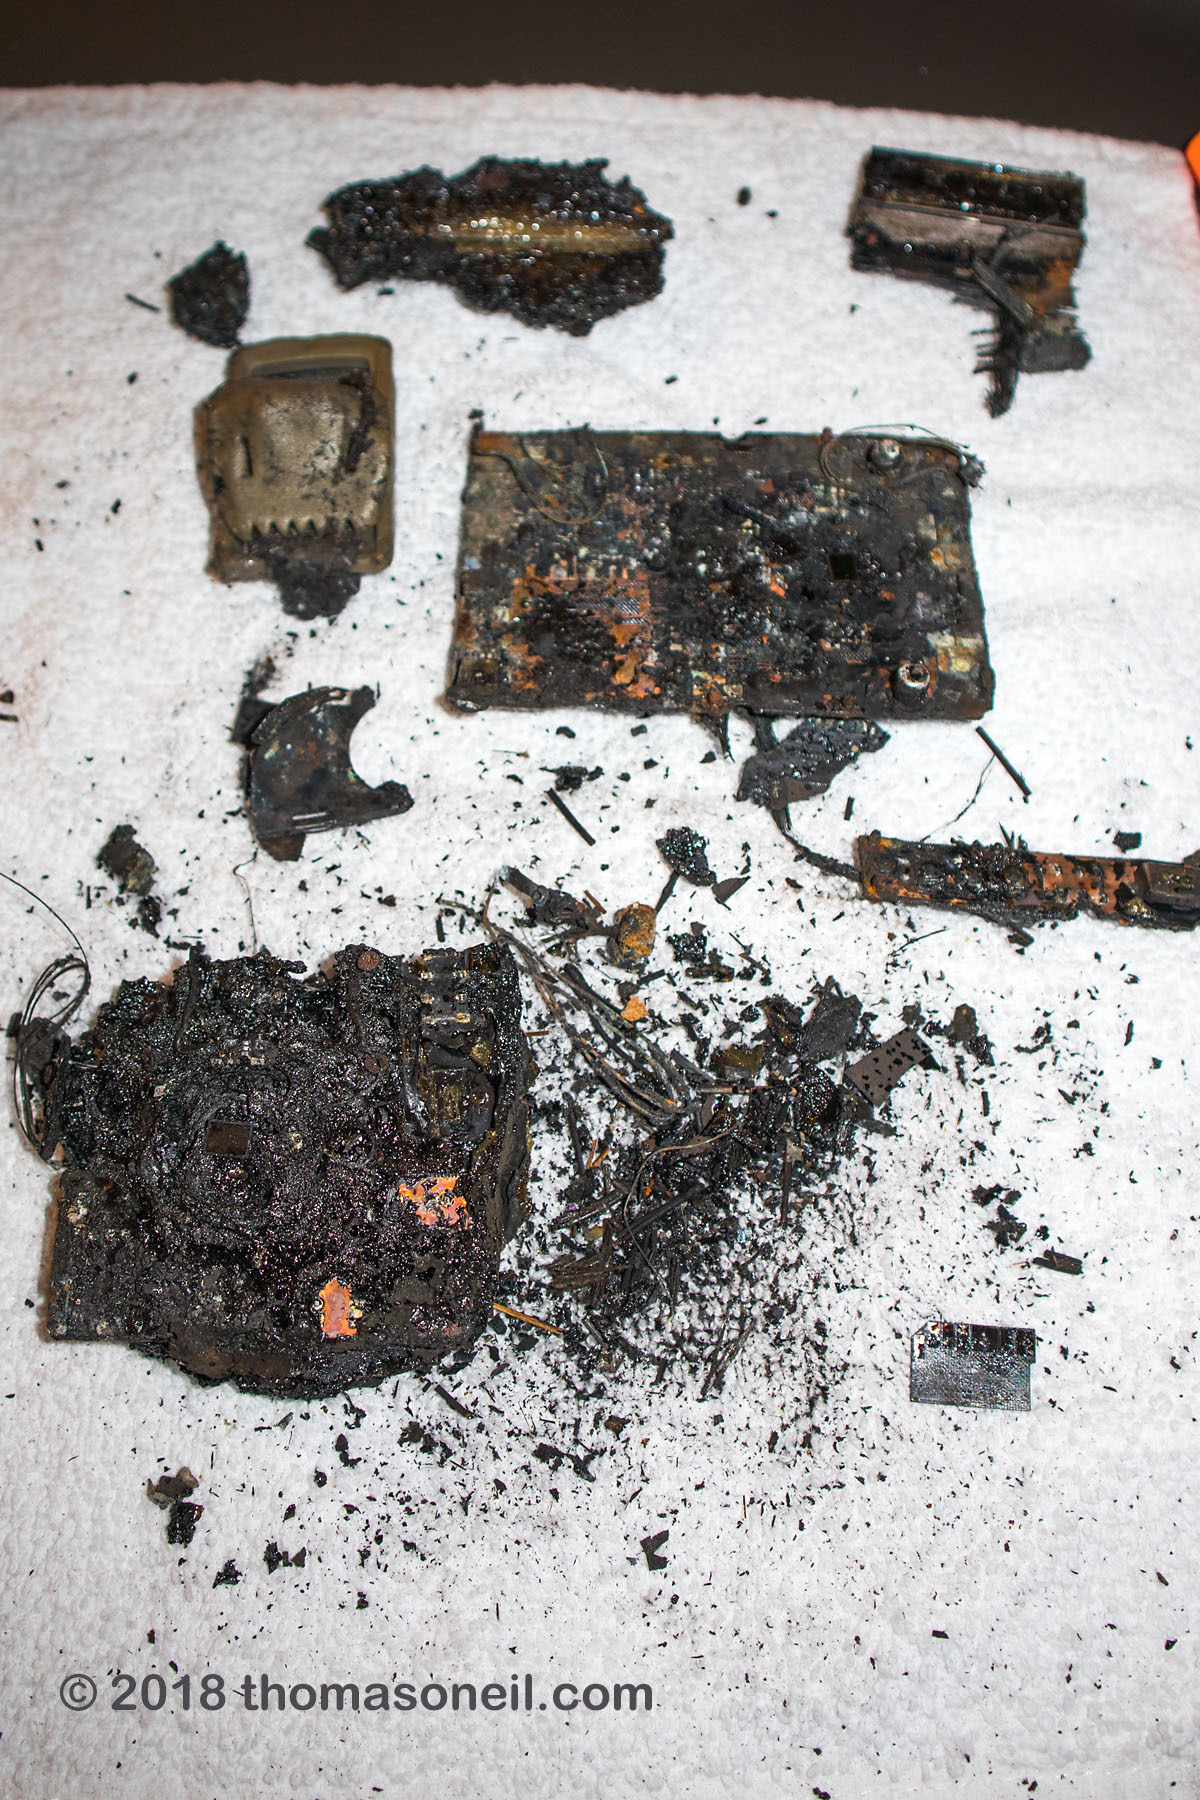 The remains of my Moultrie trail camera, destroyed by fire in December 2017 in Custer State Park